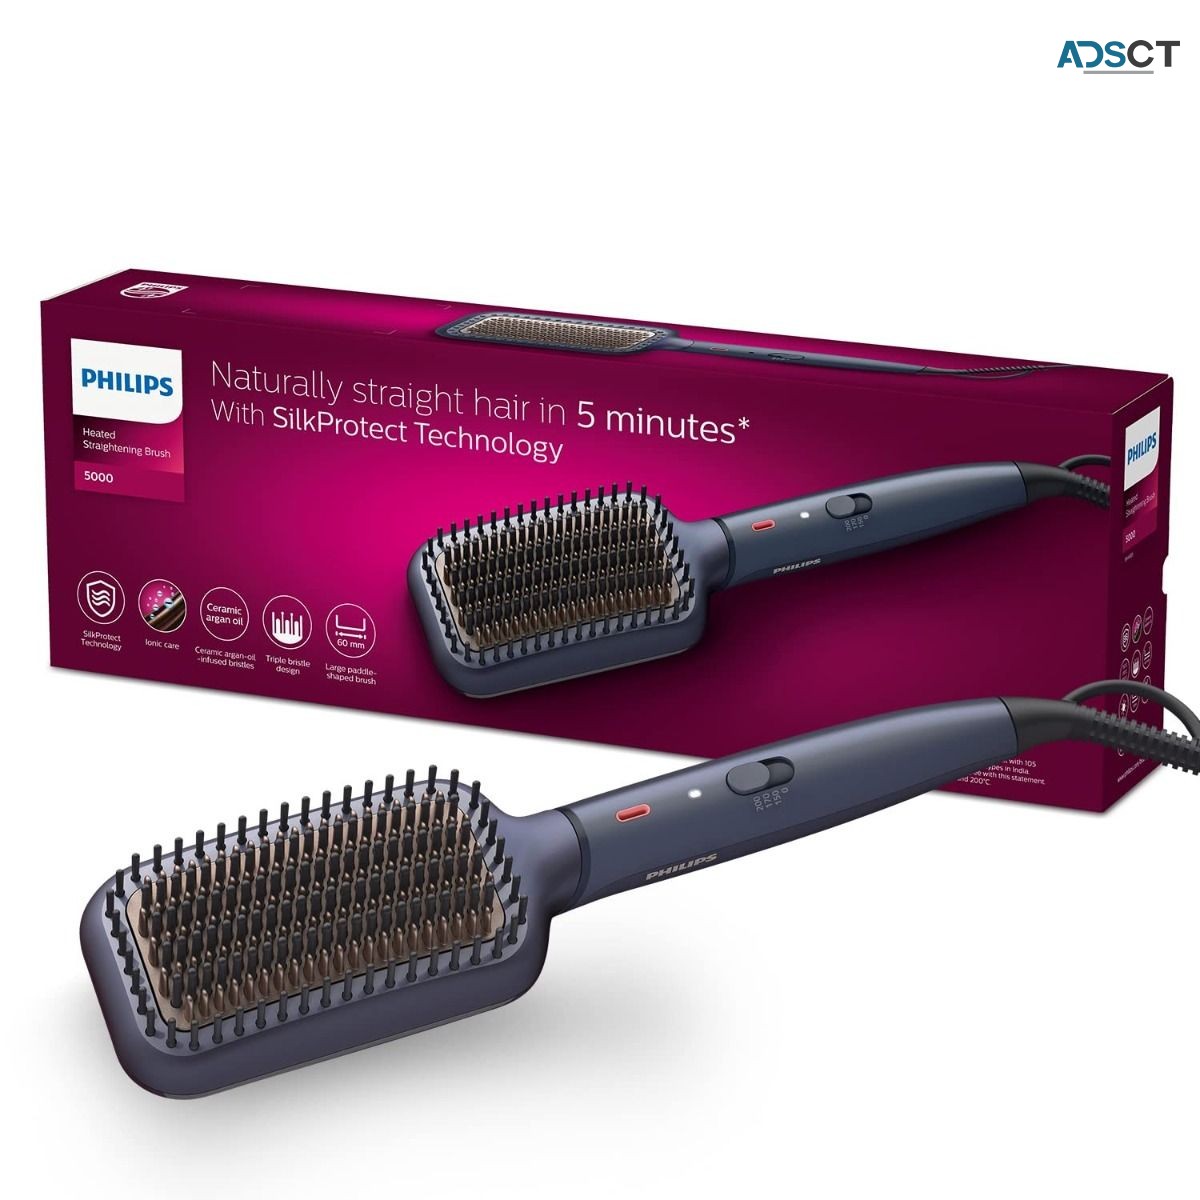  Heated Straightening Brush, BHH885/10 With Silk Protect Technology